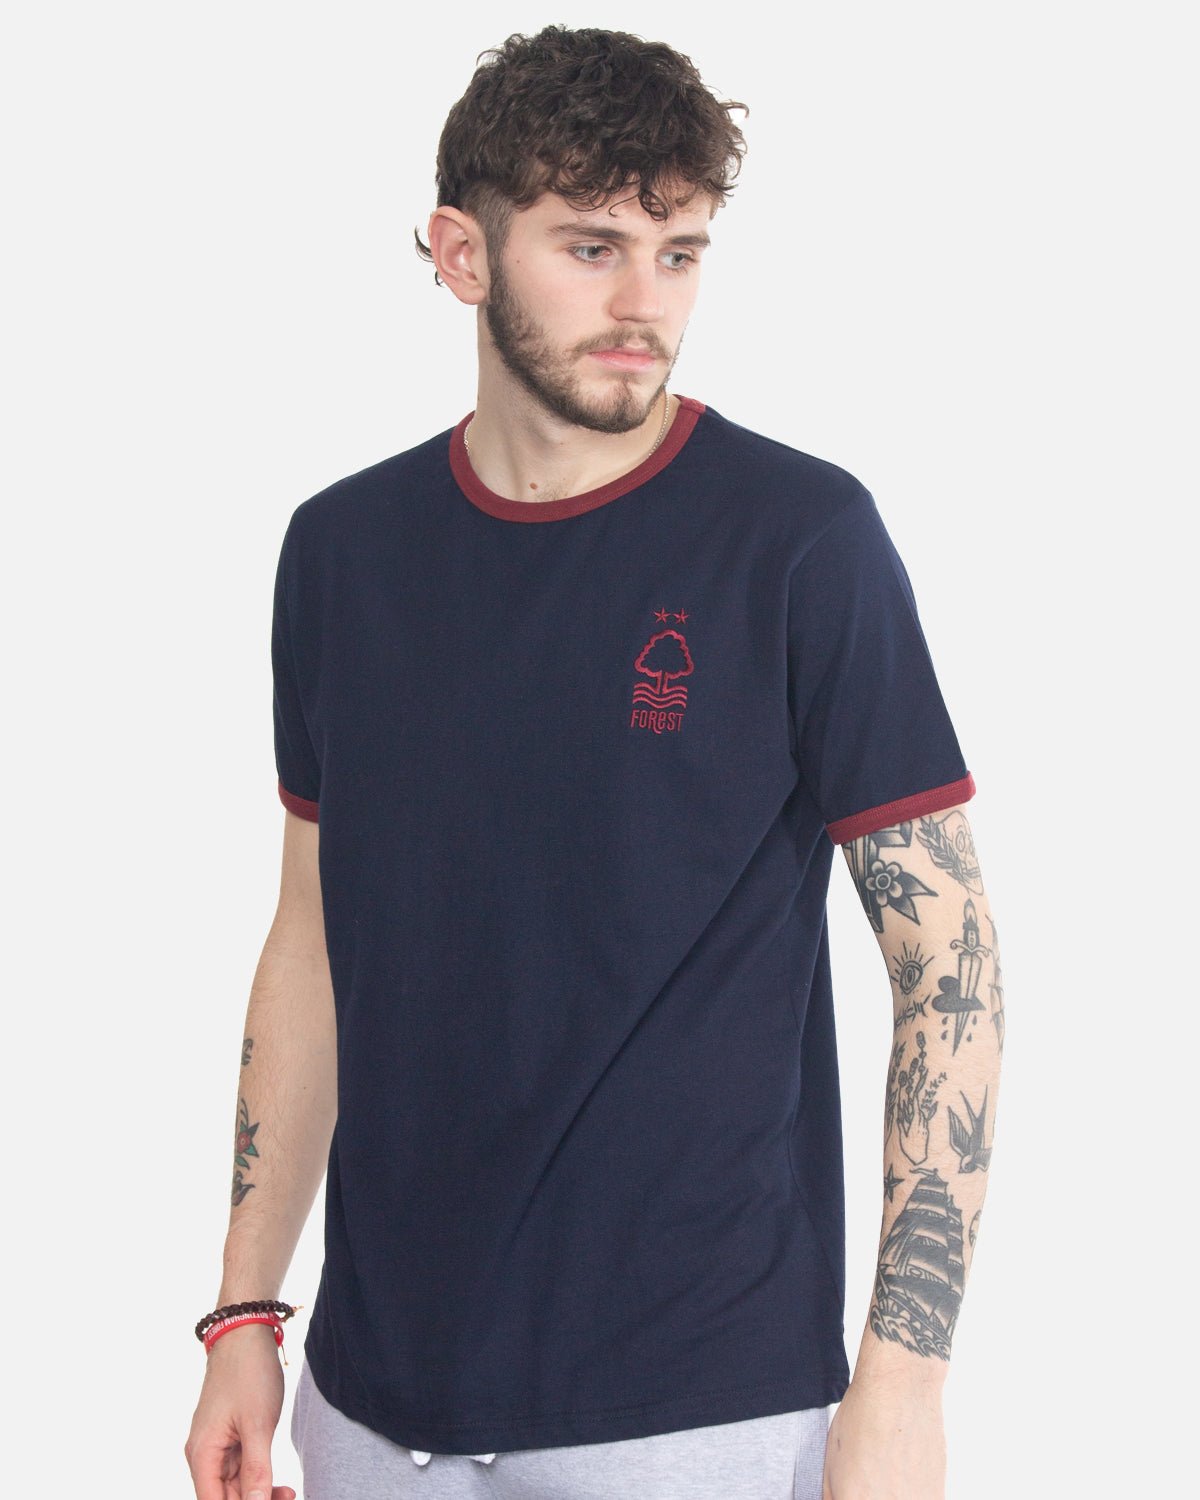 NFFC Adults Navy Ringer T-Shirt - Nottingham Forest FC